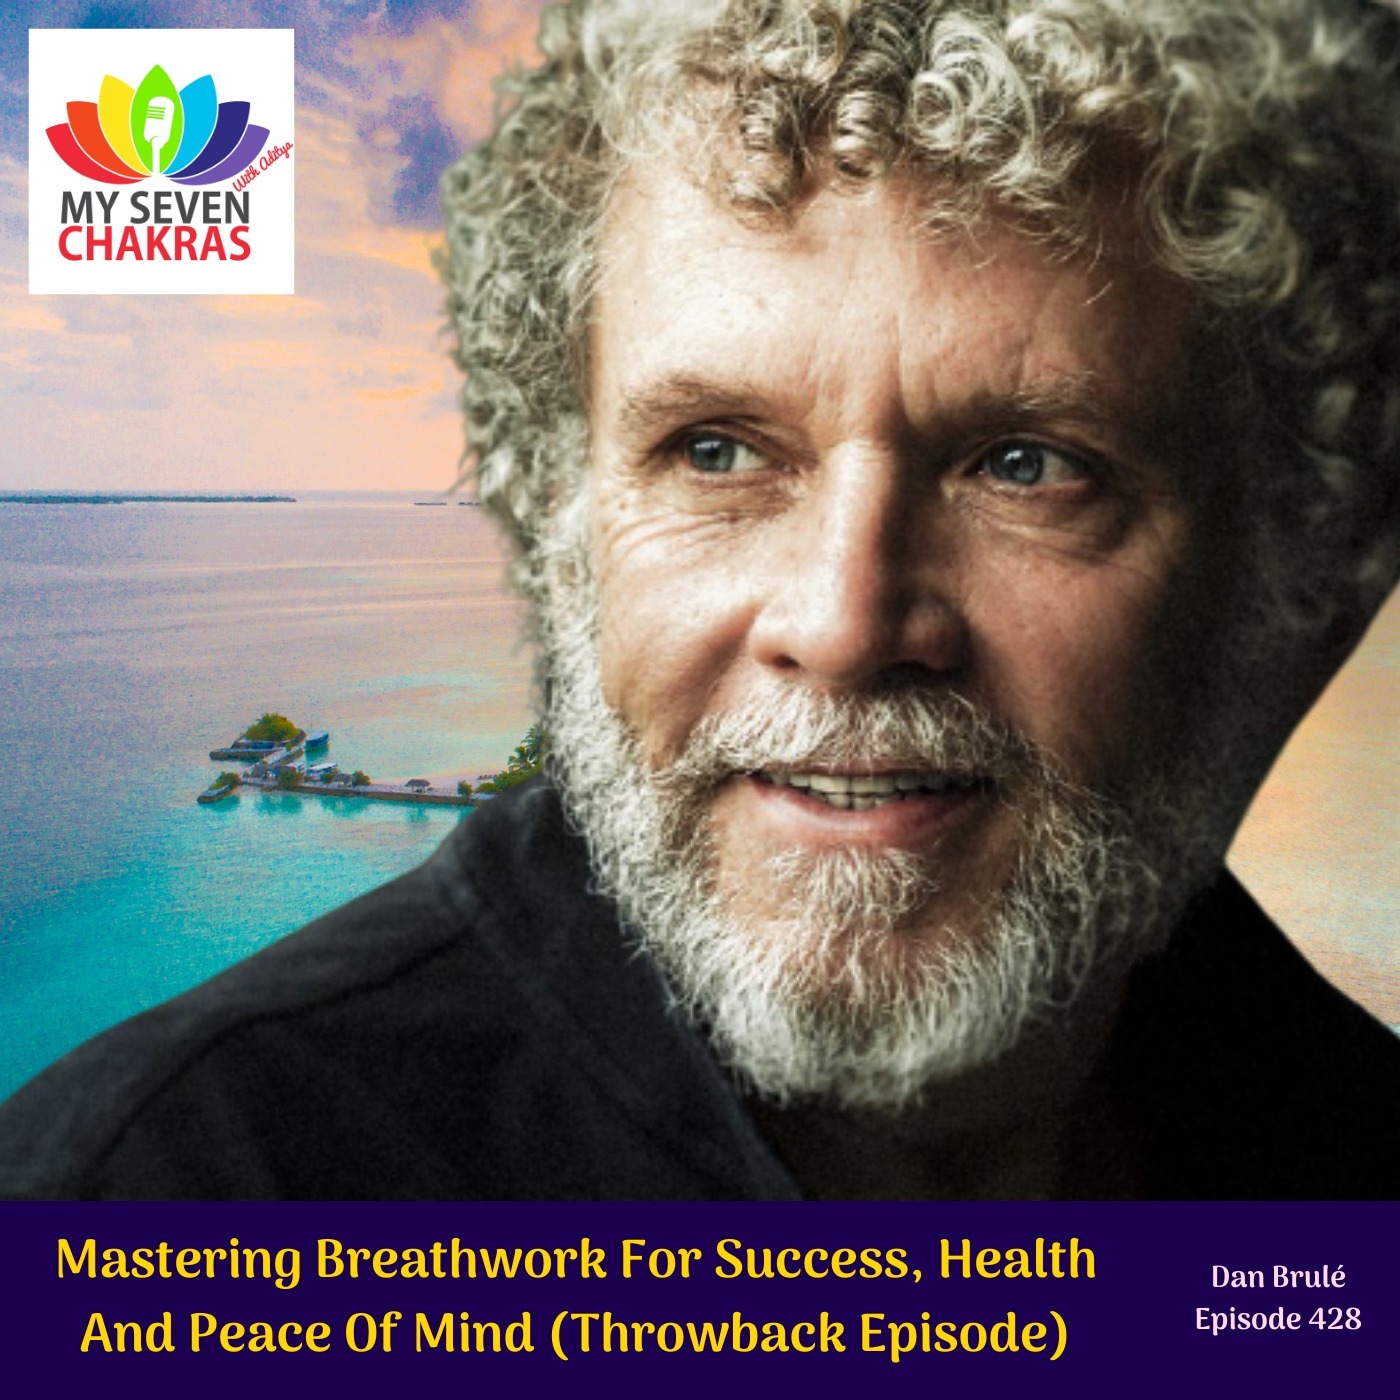 Mastering Breathwork For Success, Health And Peace Of Mind (Throwback Episode) with Dan Brulé